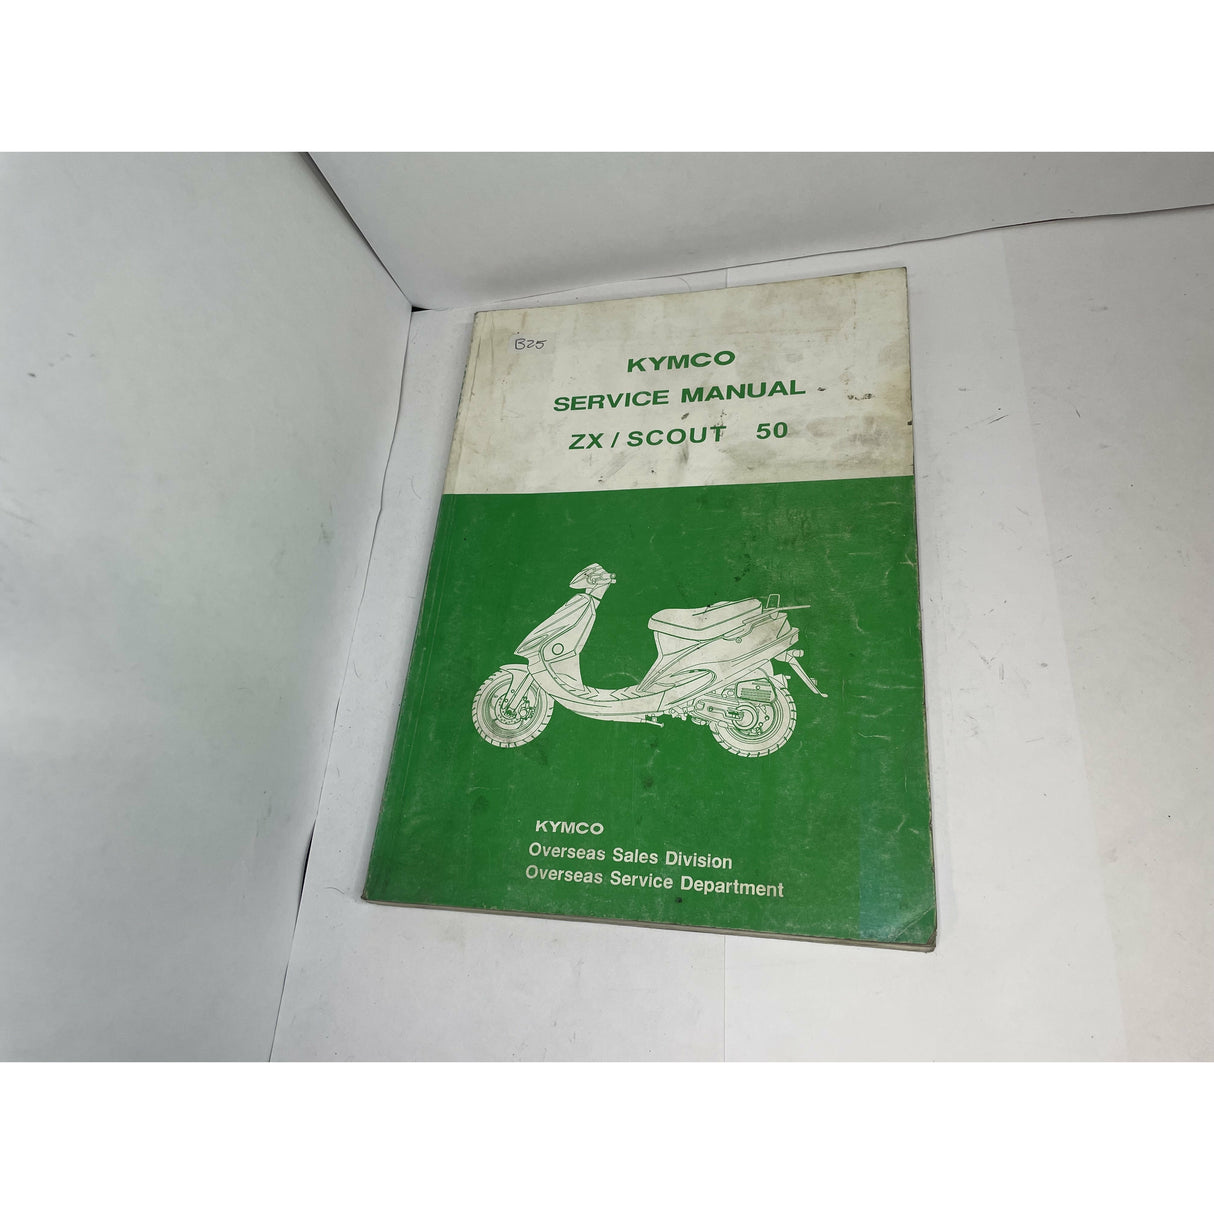 Manual KYMCO ZX / SCOUT 50